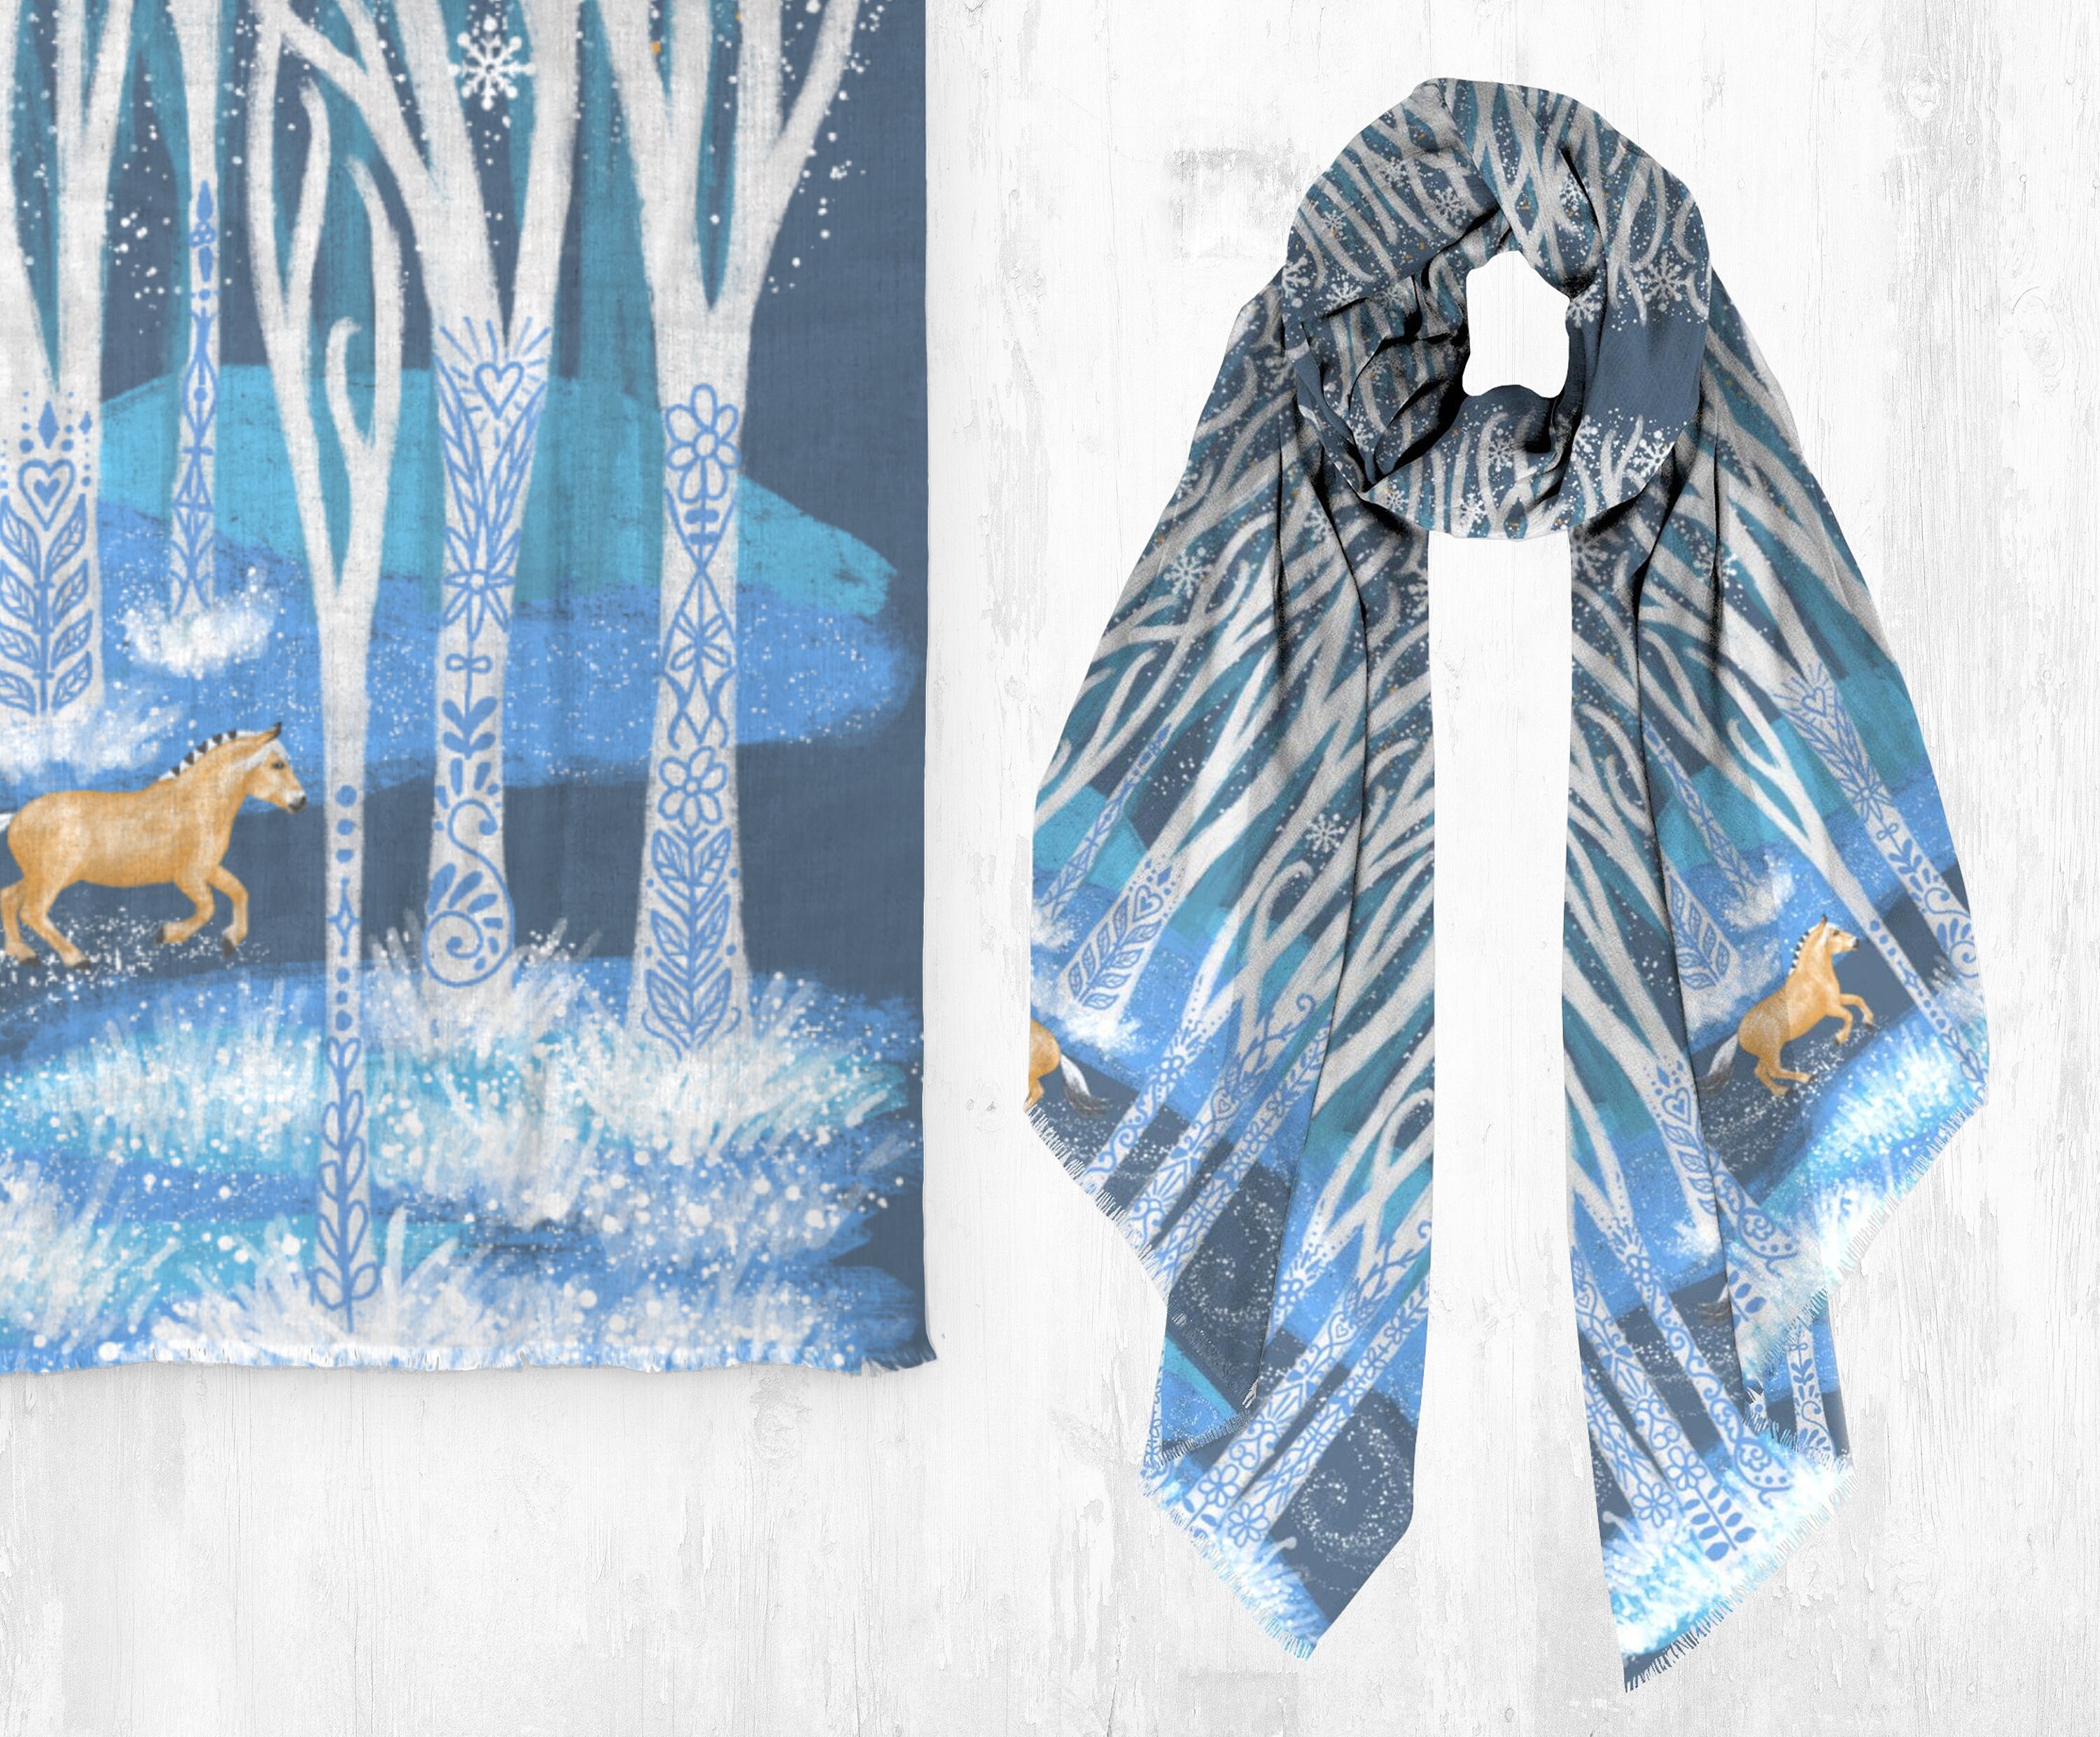 Designer Inspired Equestrian Carriage Horse “H” Scarf Wrap